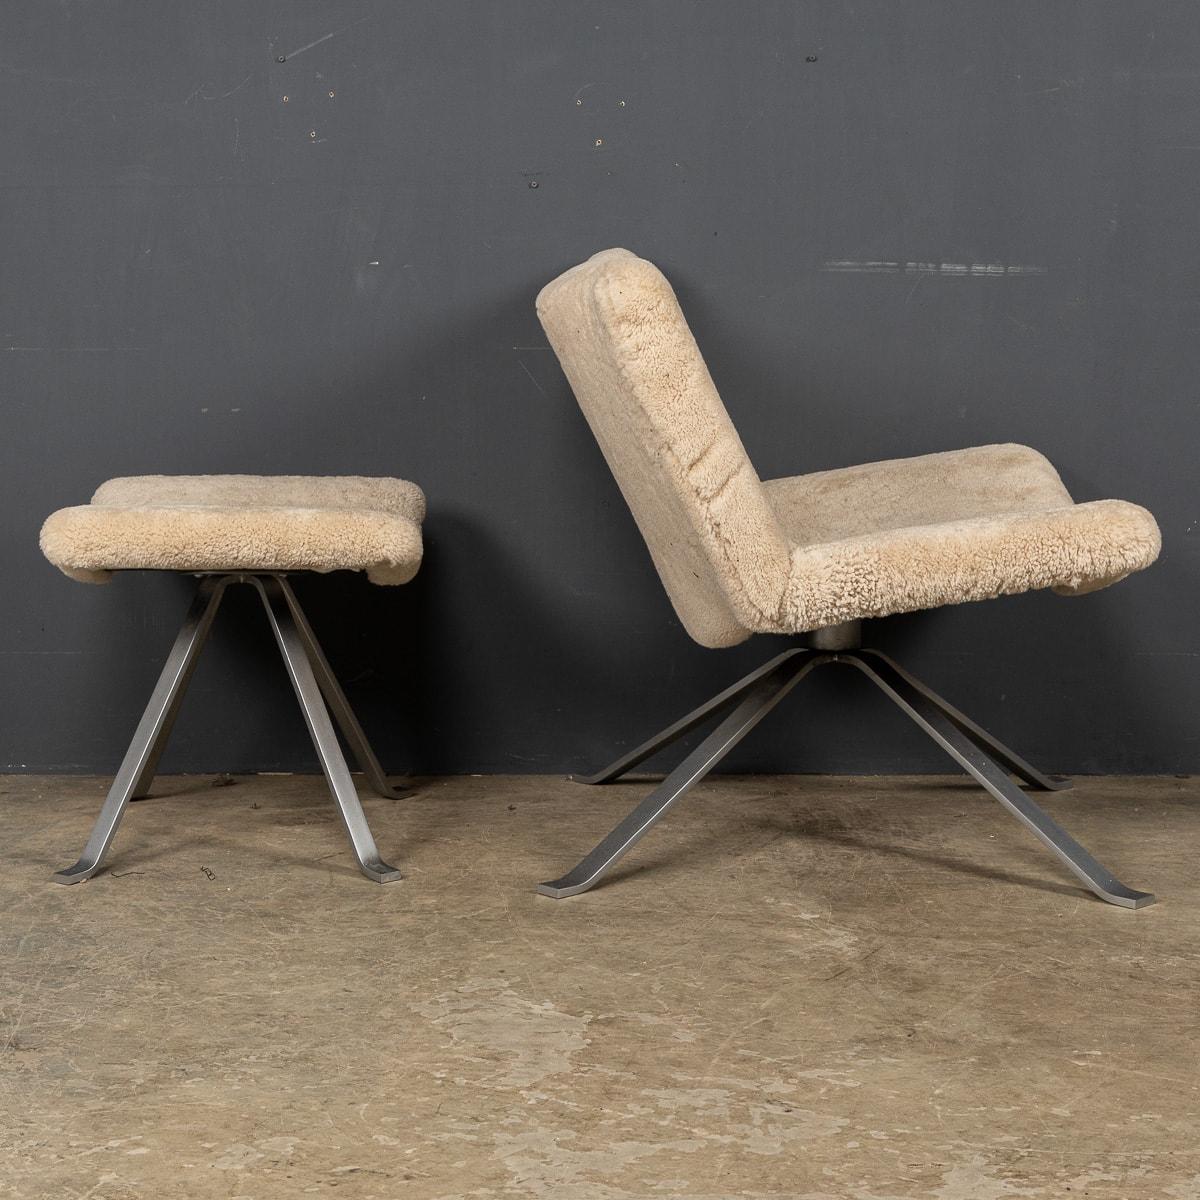 20th Century Italian Swivel Chairs with Matching Foot Stools, circa 1970 For Sale 1